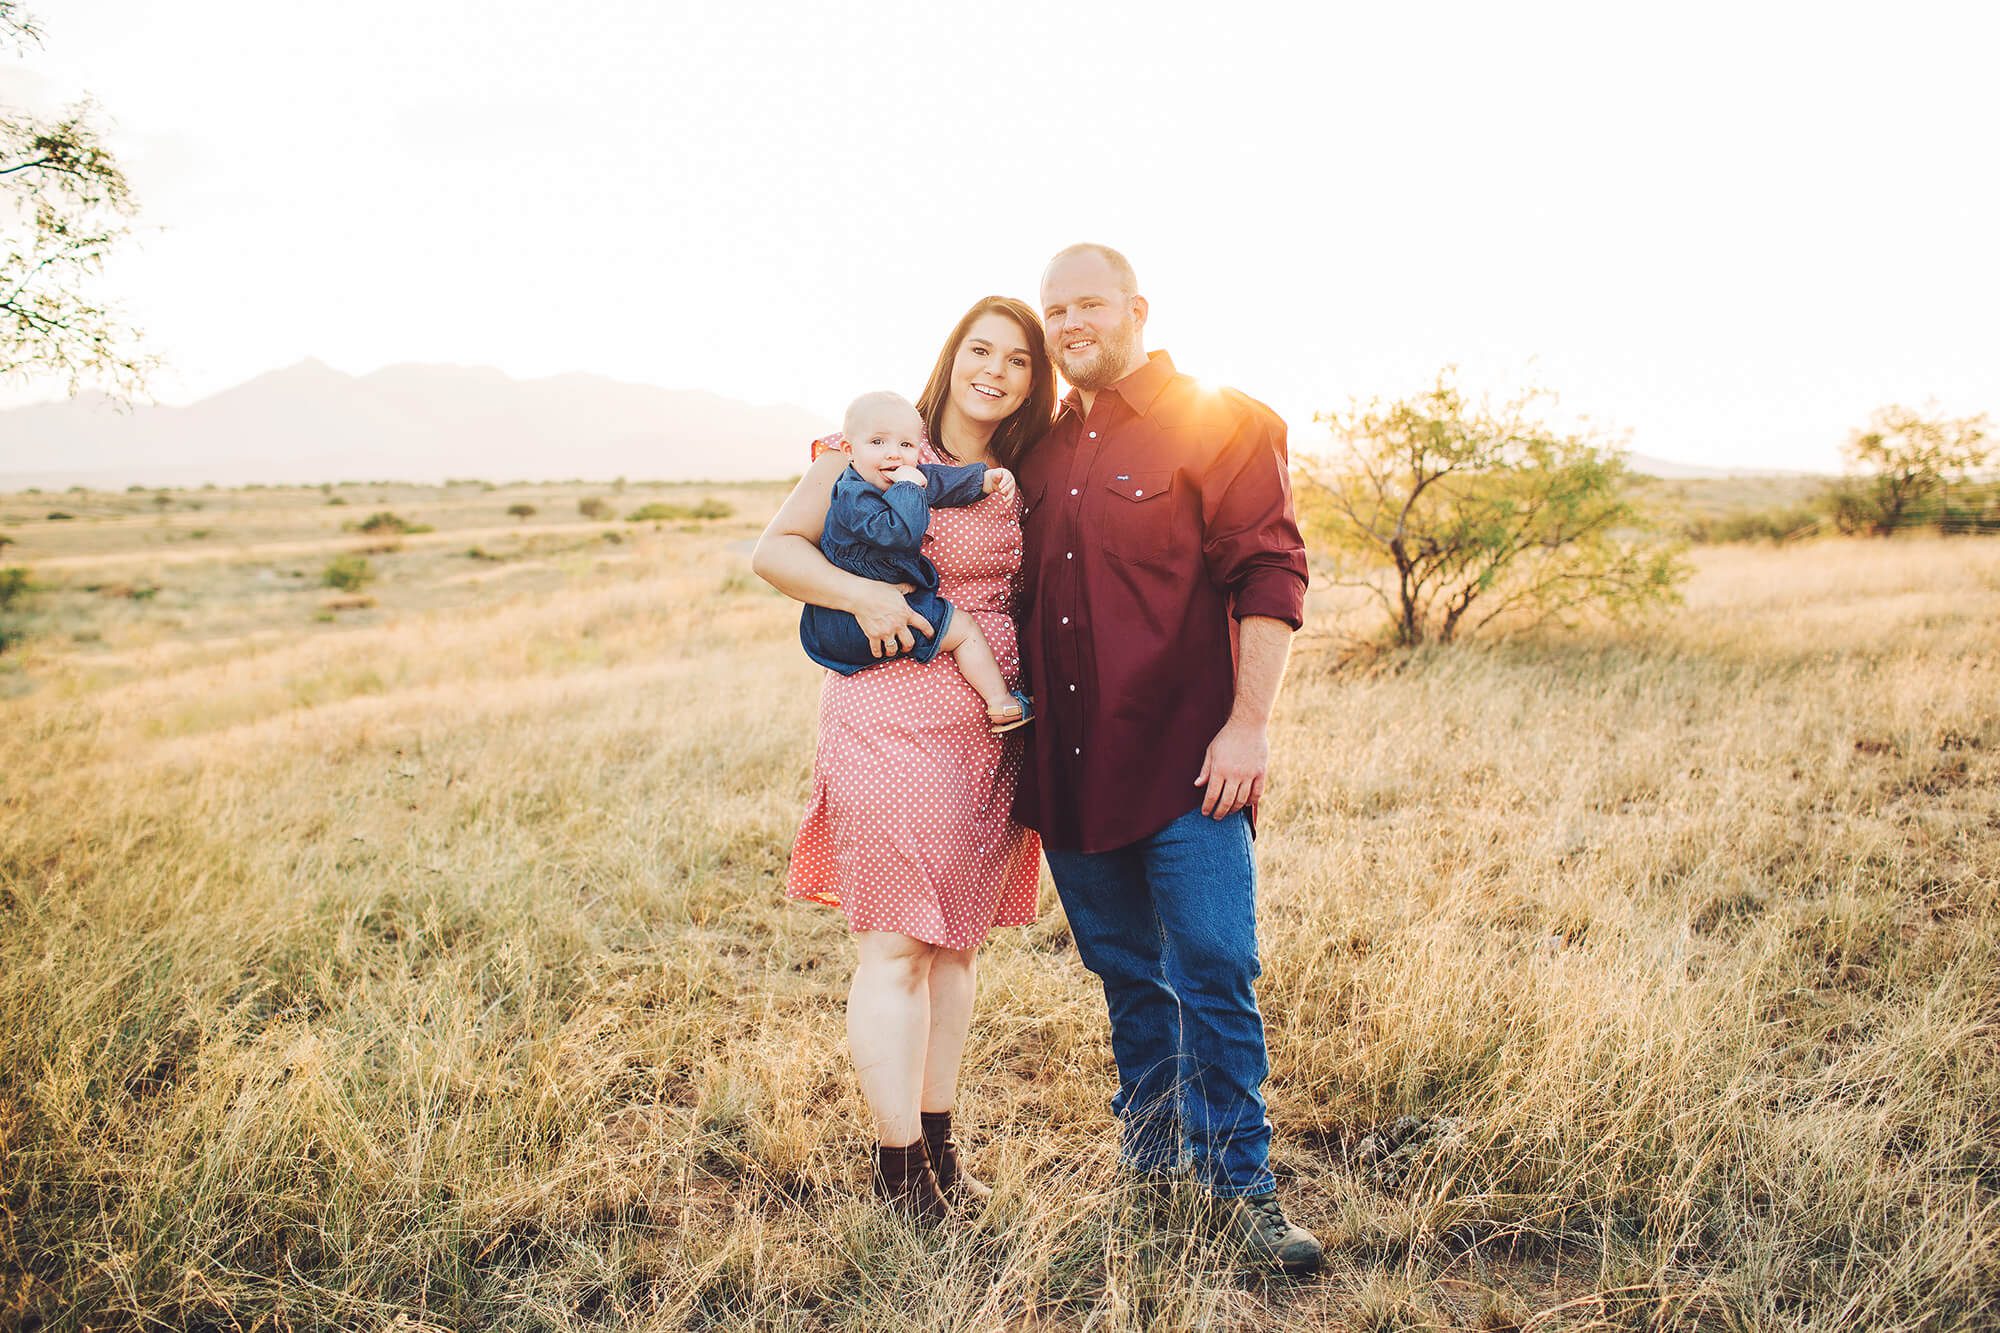 The Tawney family at sunset in Sonoita during their final family session with me.